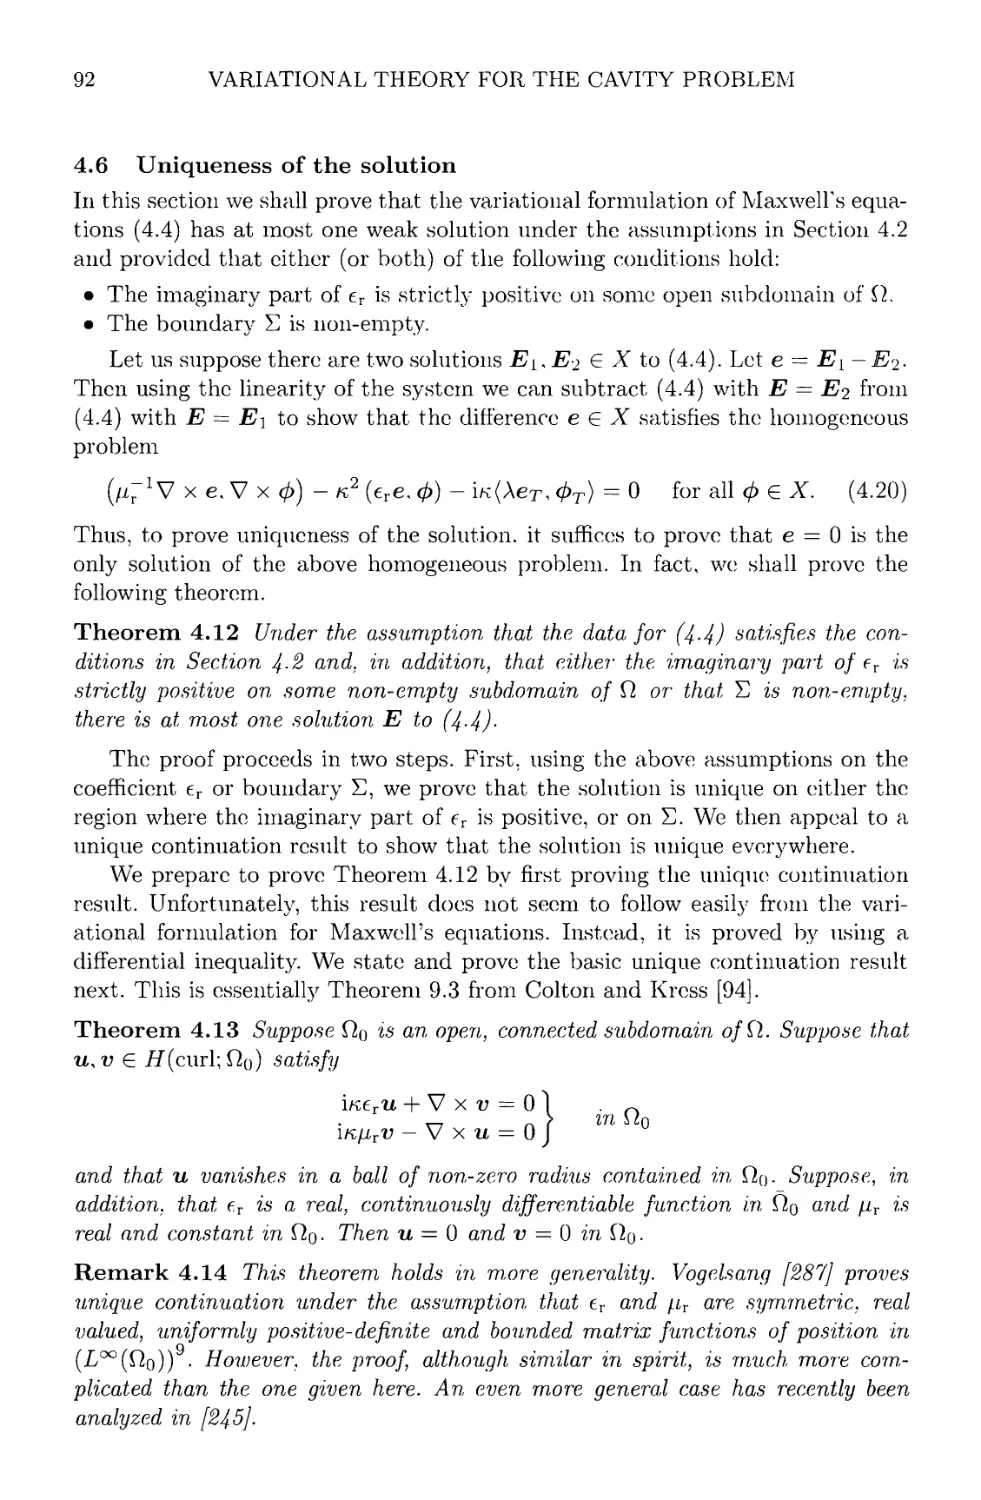 4.6 Uniqueness of the solution